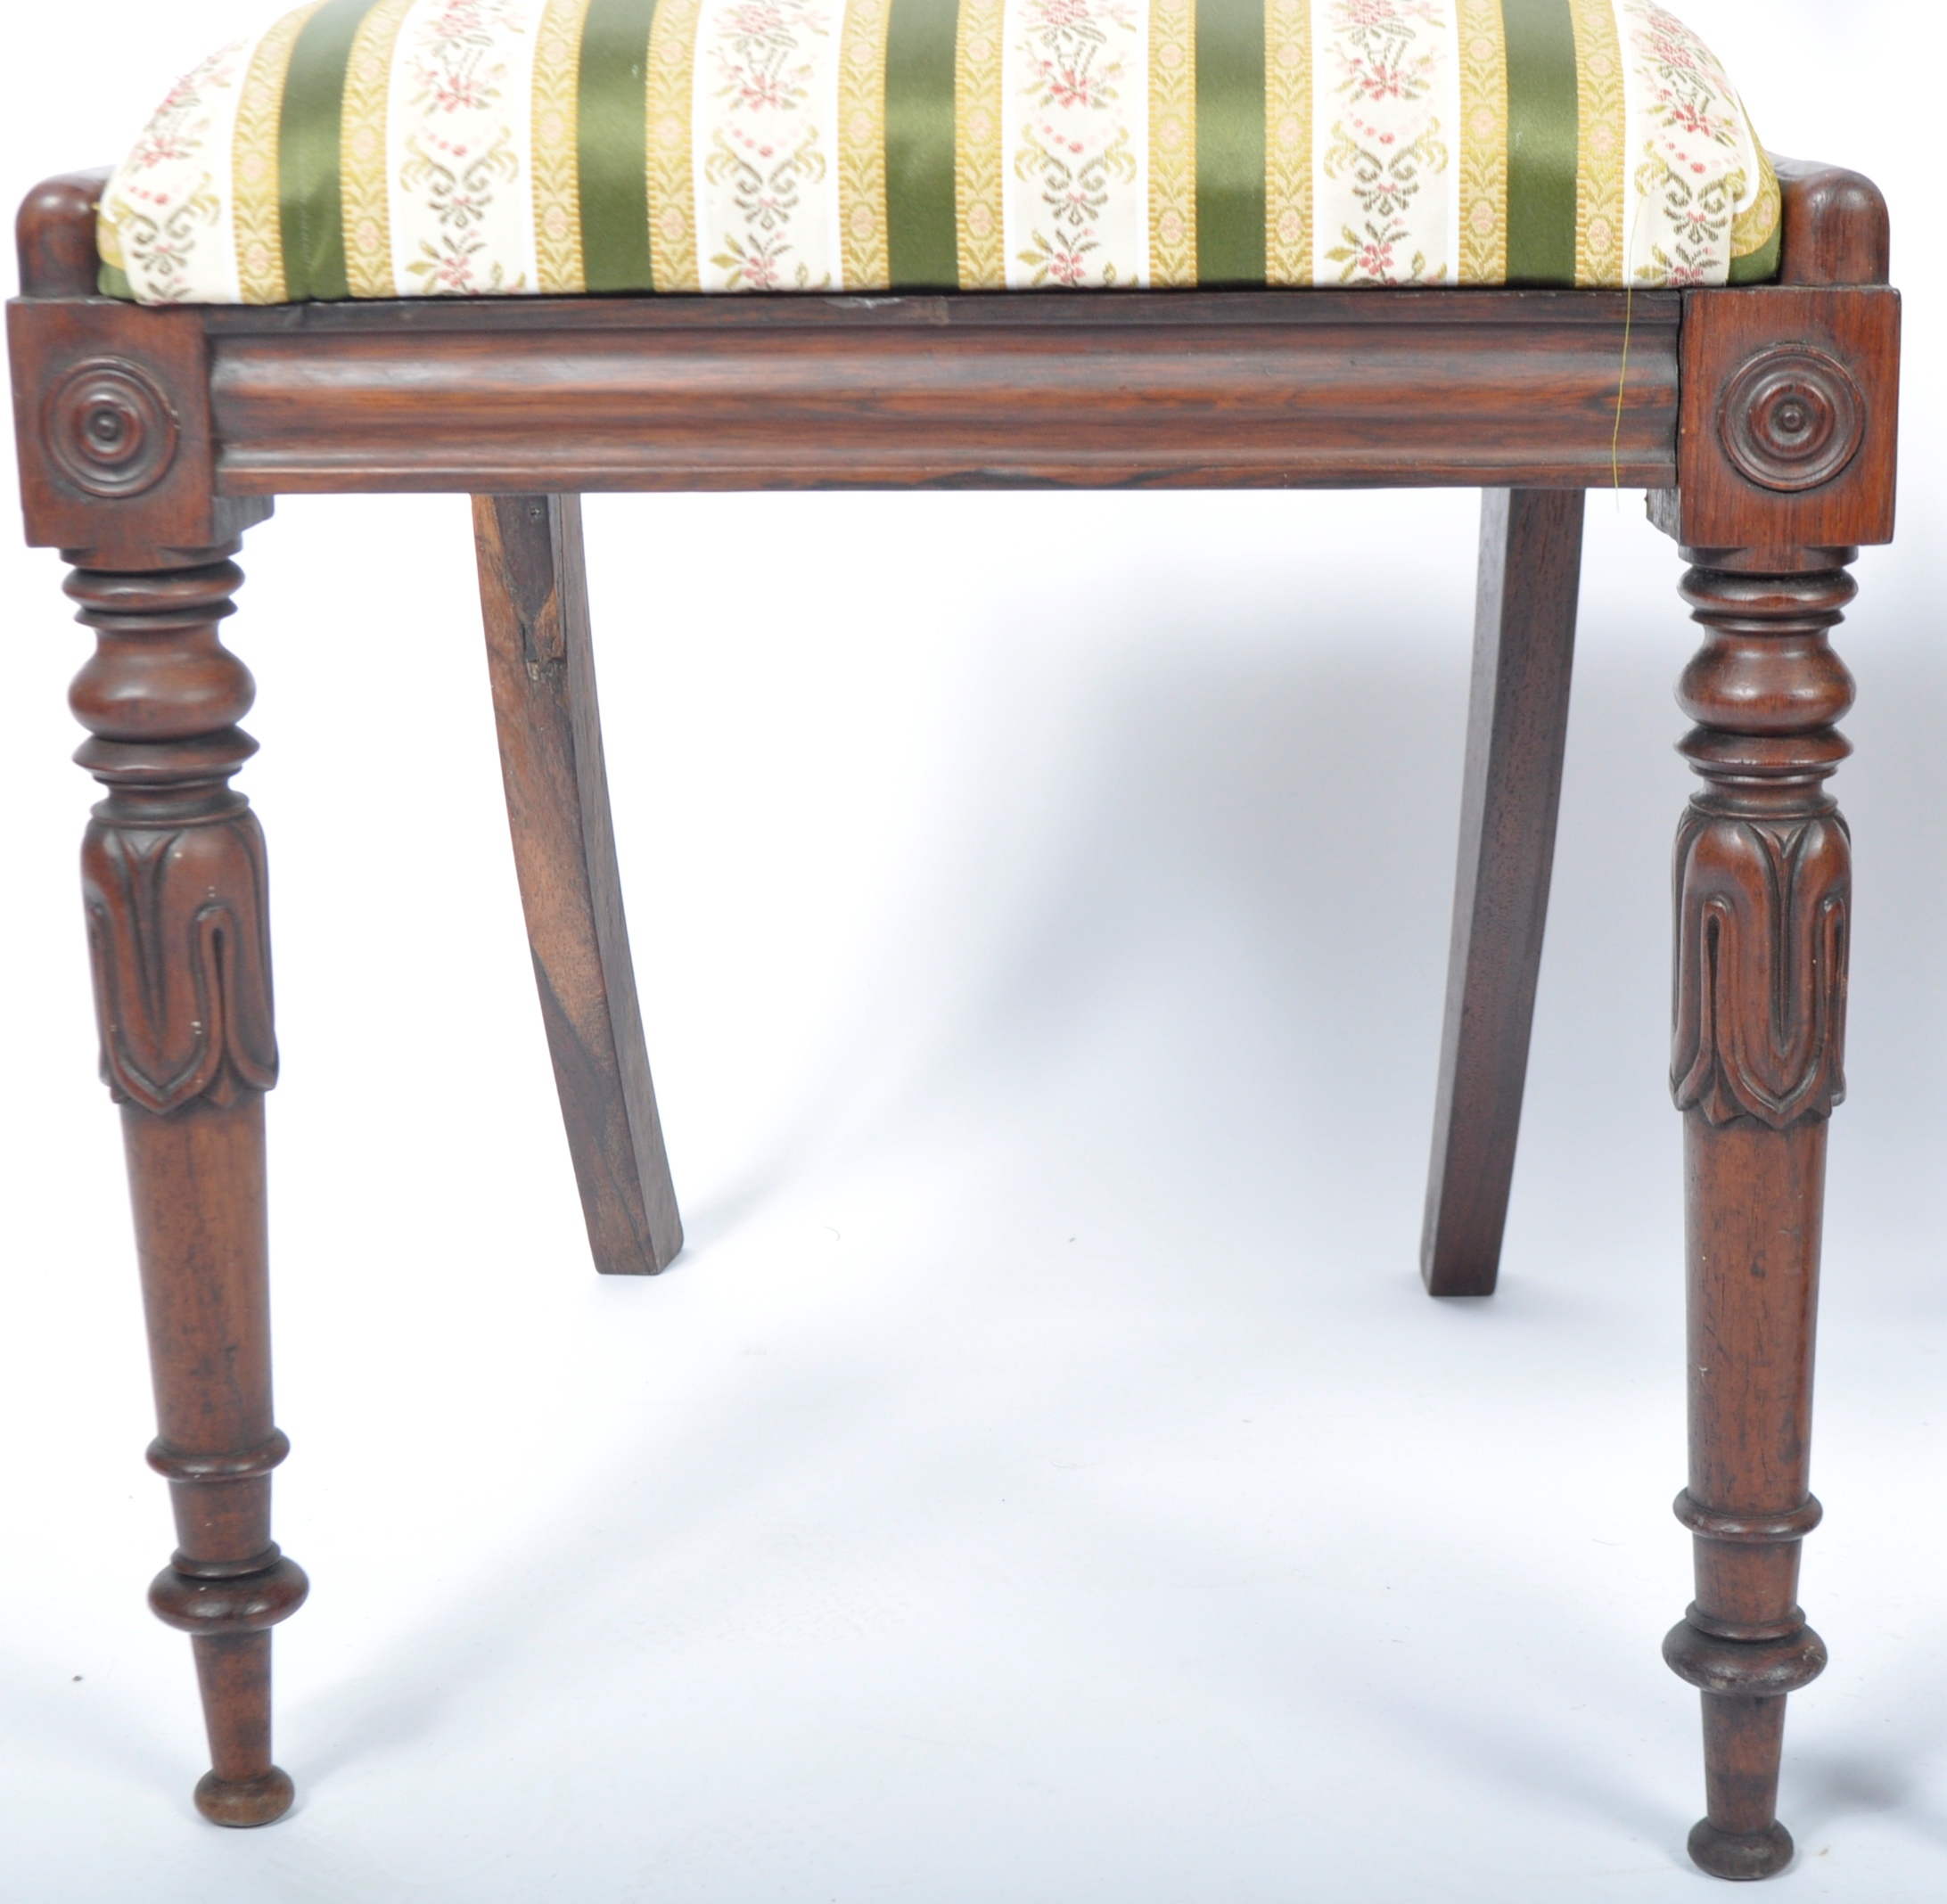 SIX 19TH CENTURY ROSEWOOD DINING CHAIRS IN THE GILLOWS MANNER - Image 3 of 11